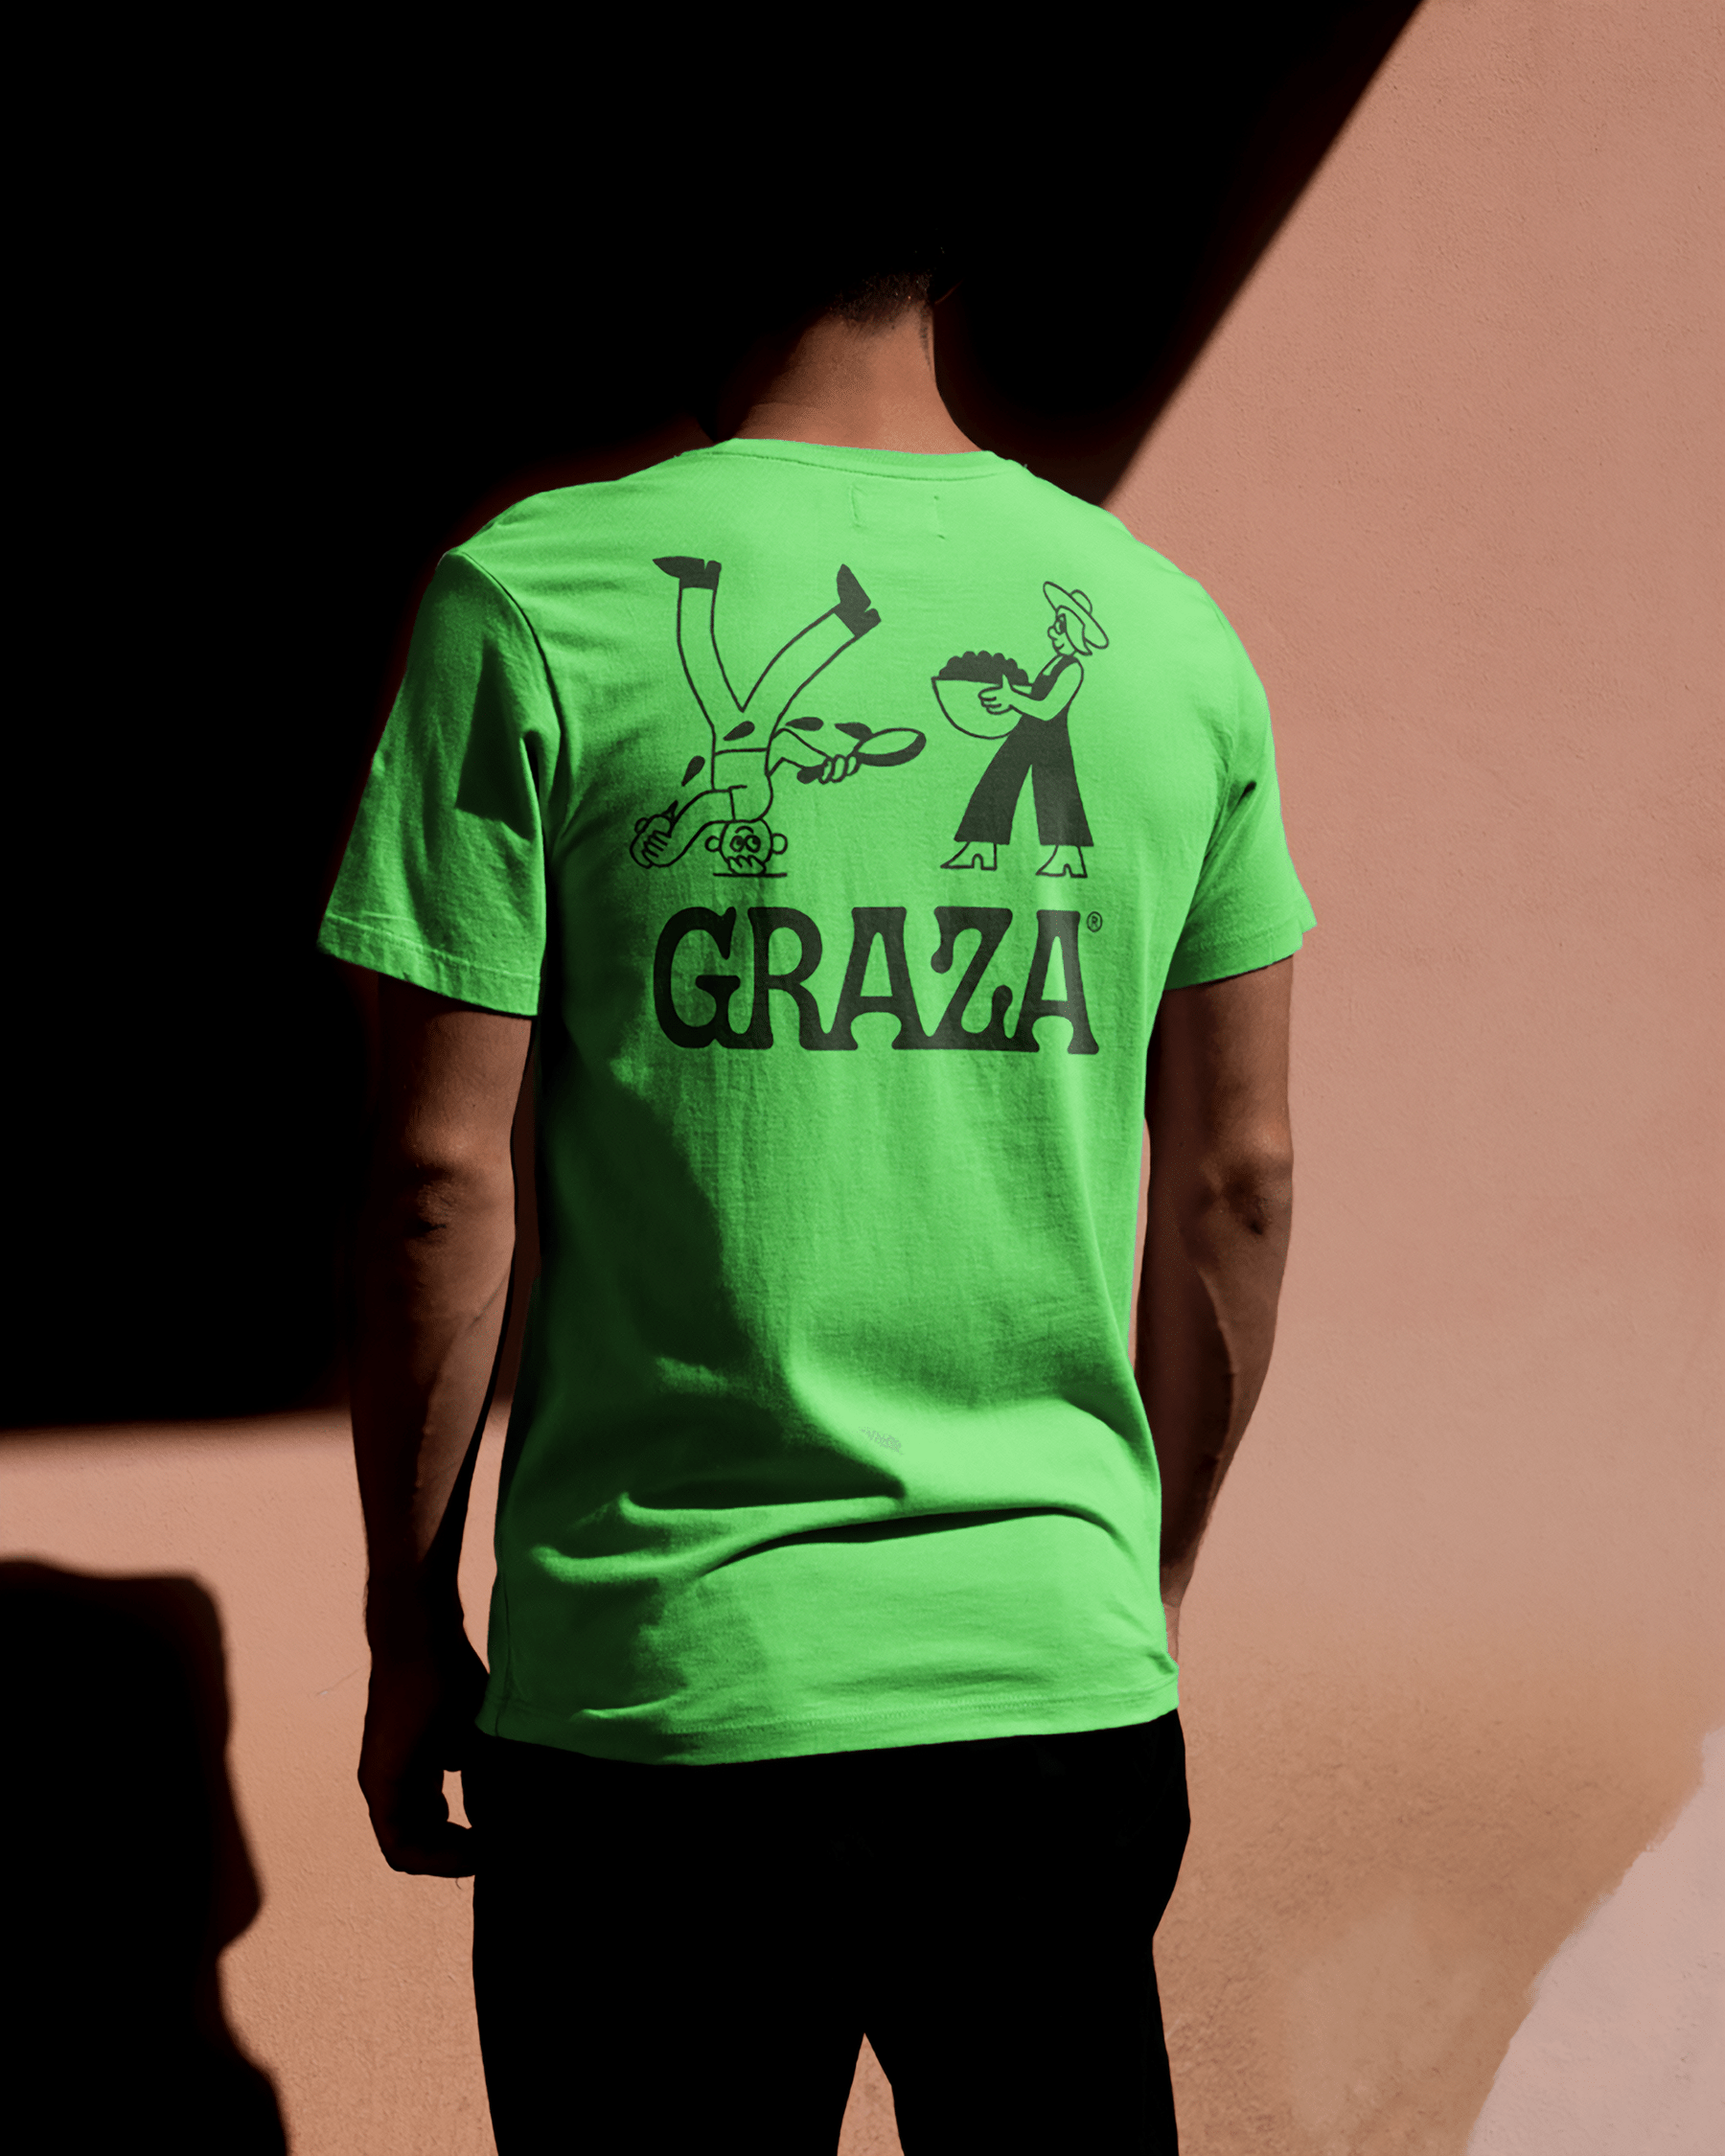 Logotype and branded t-shirt by Gander for squeezable olive oil Graza. Reviewed by Anna Marar for BP&O